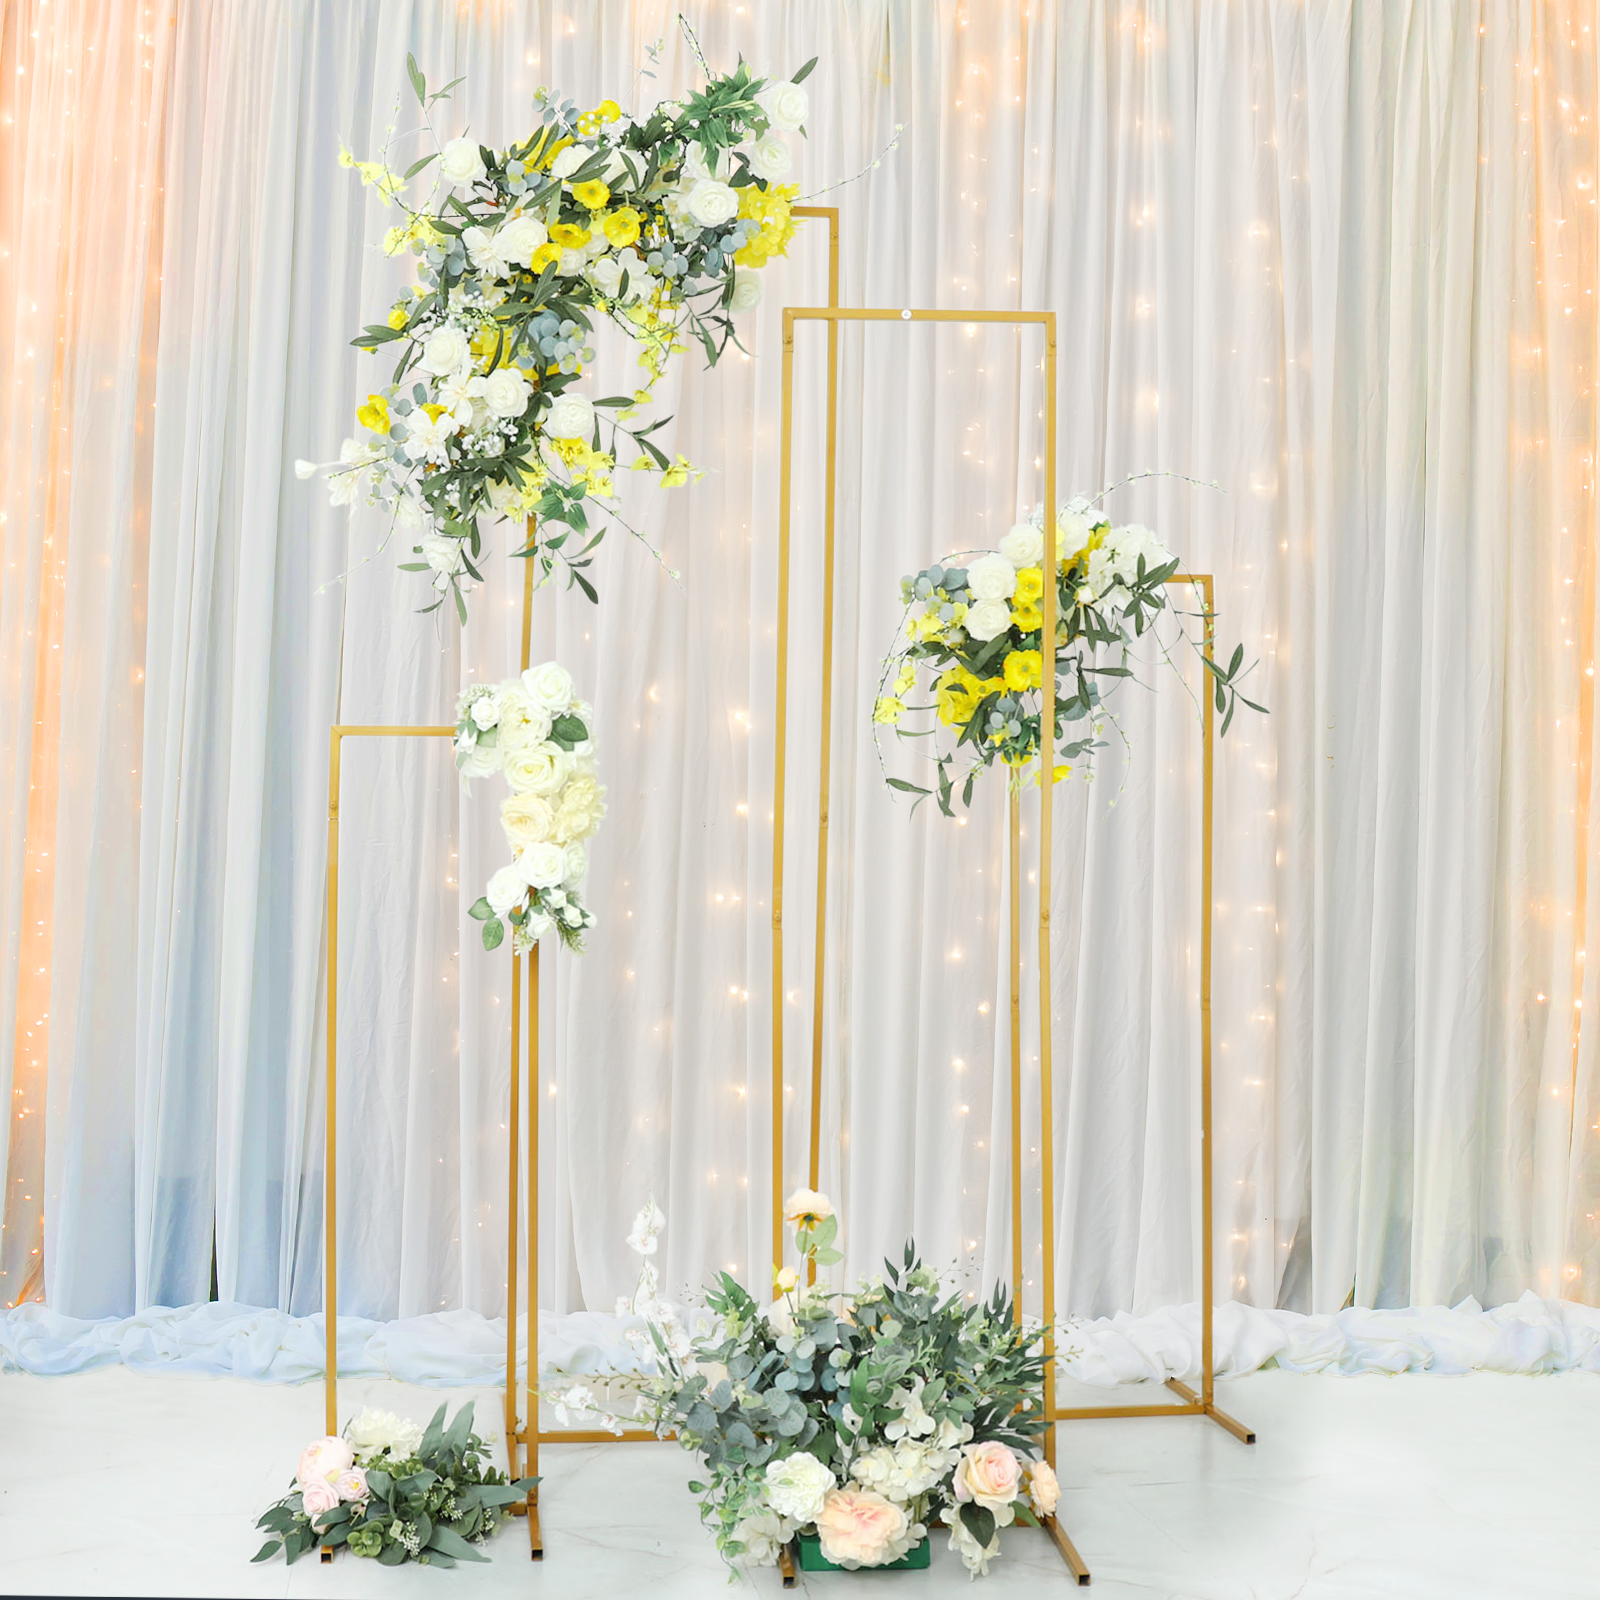 78 in. x 120 in. Backdrop Stand, Arch Stand for Wedding, Party, Arbor